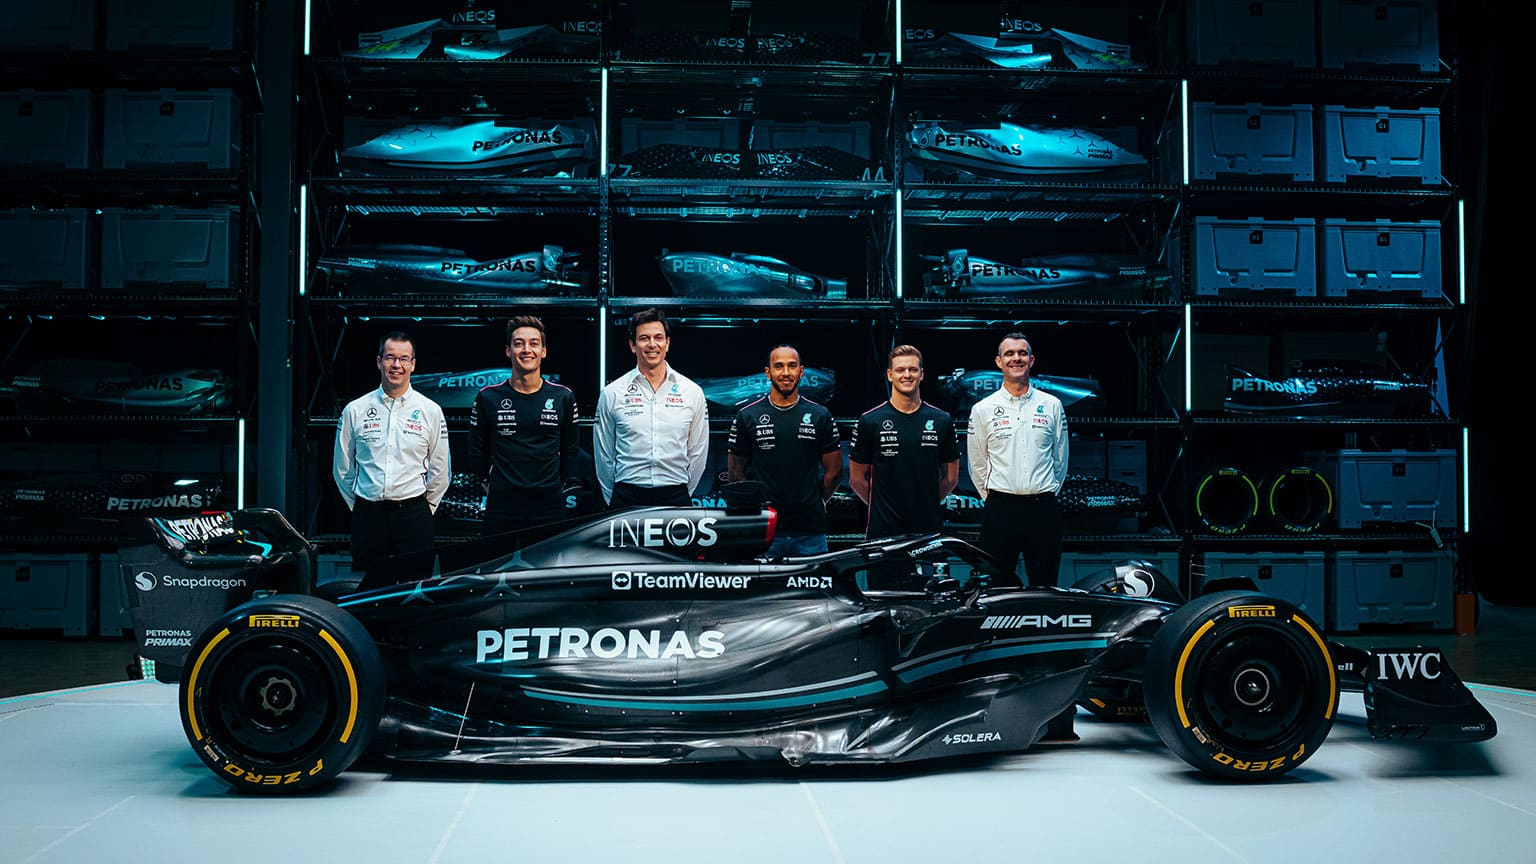 The Mercedes team around the new car